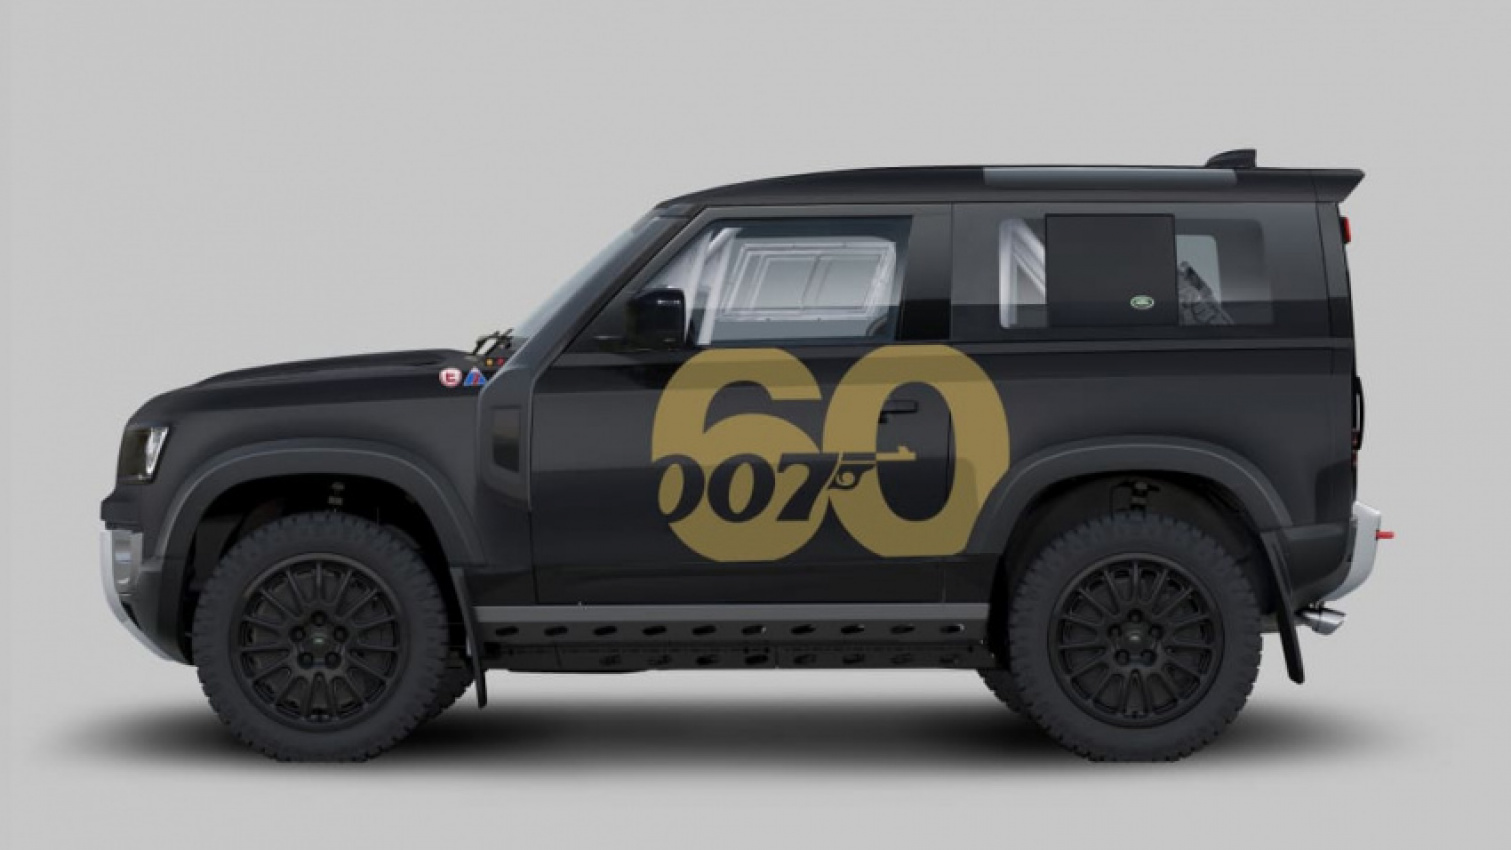 autos, cars, land rover, auto news, luxury, motorsports, off-road vehicles, performance, racing vehicles, land rover builds james bond-inspired defender rally car